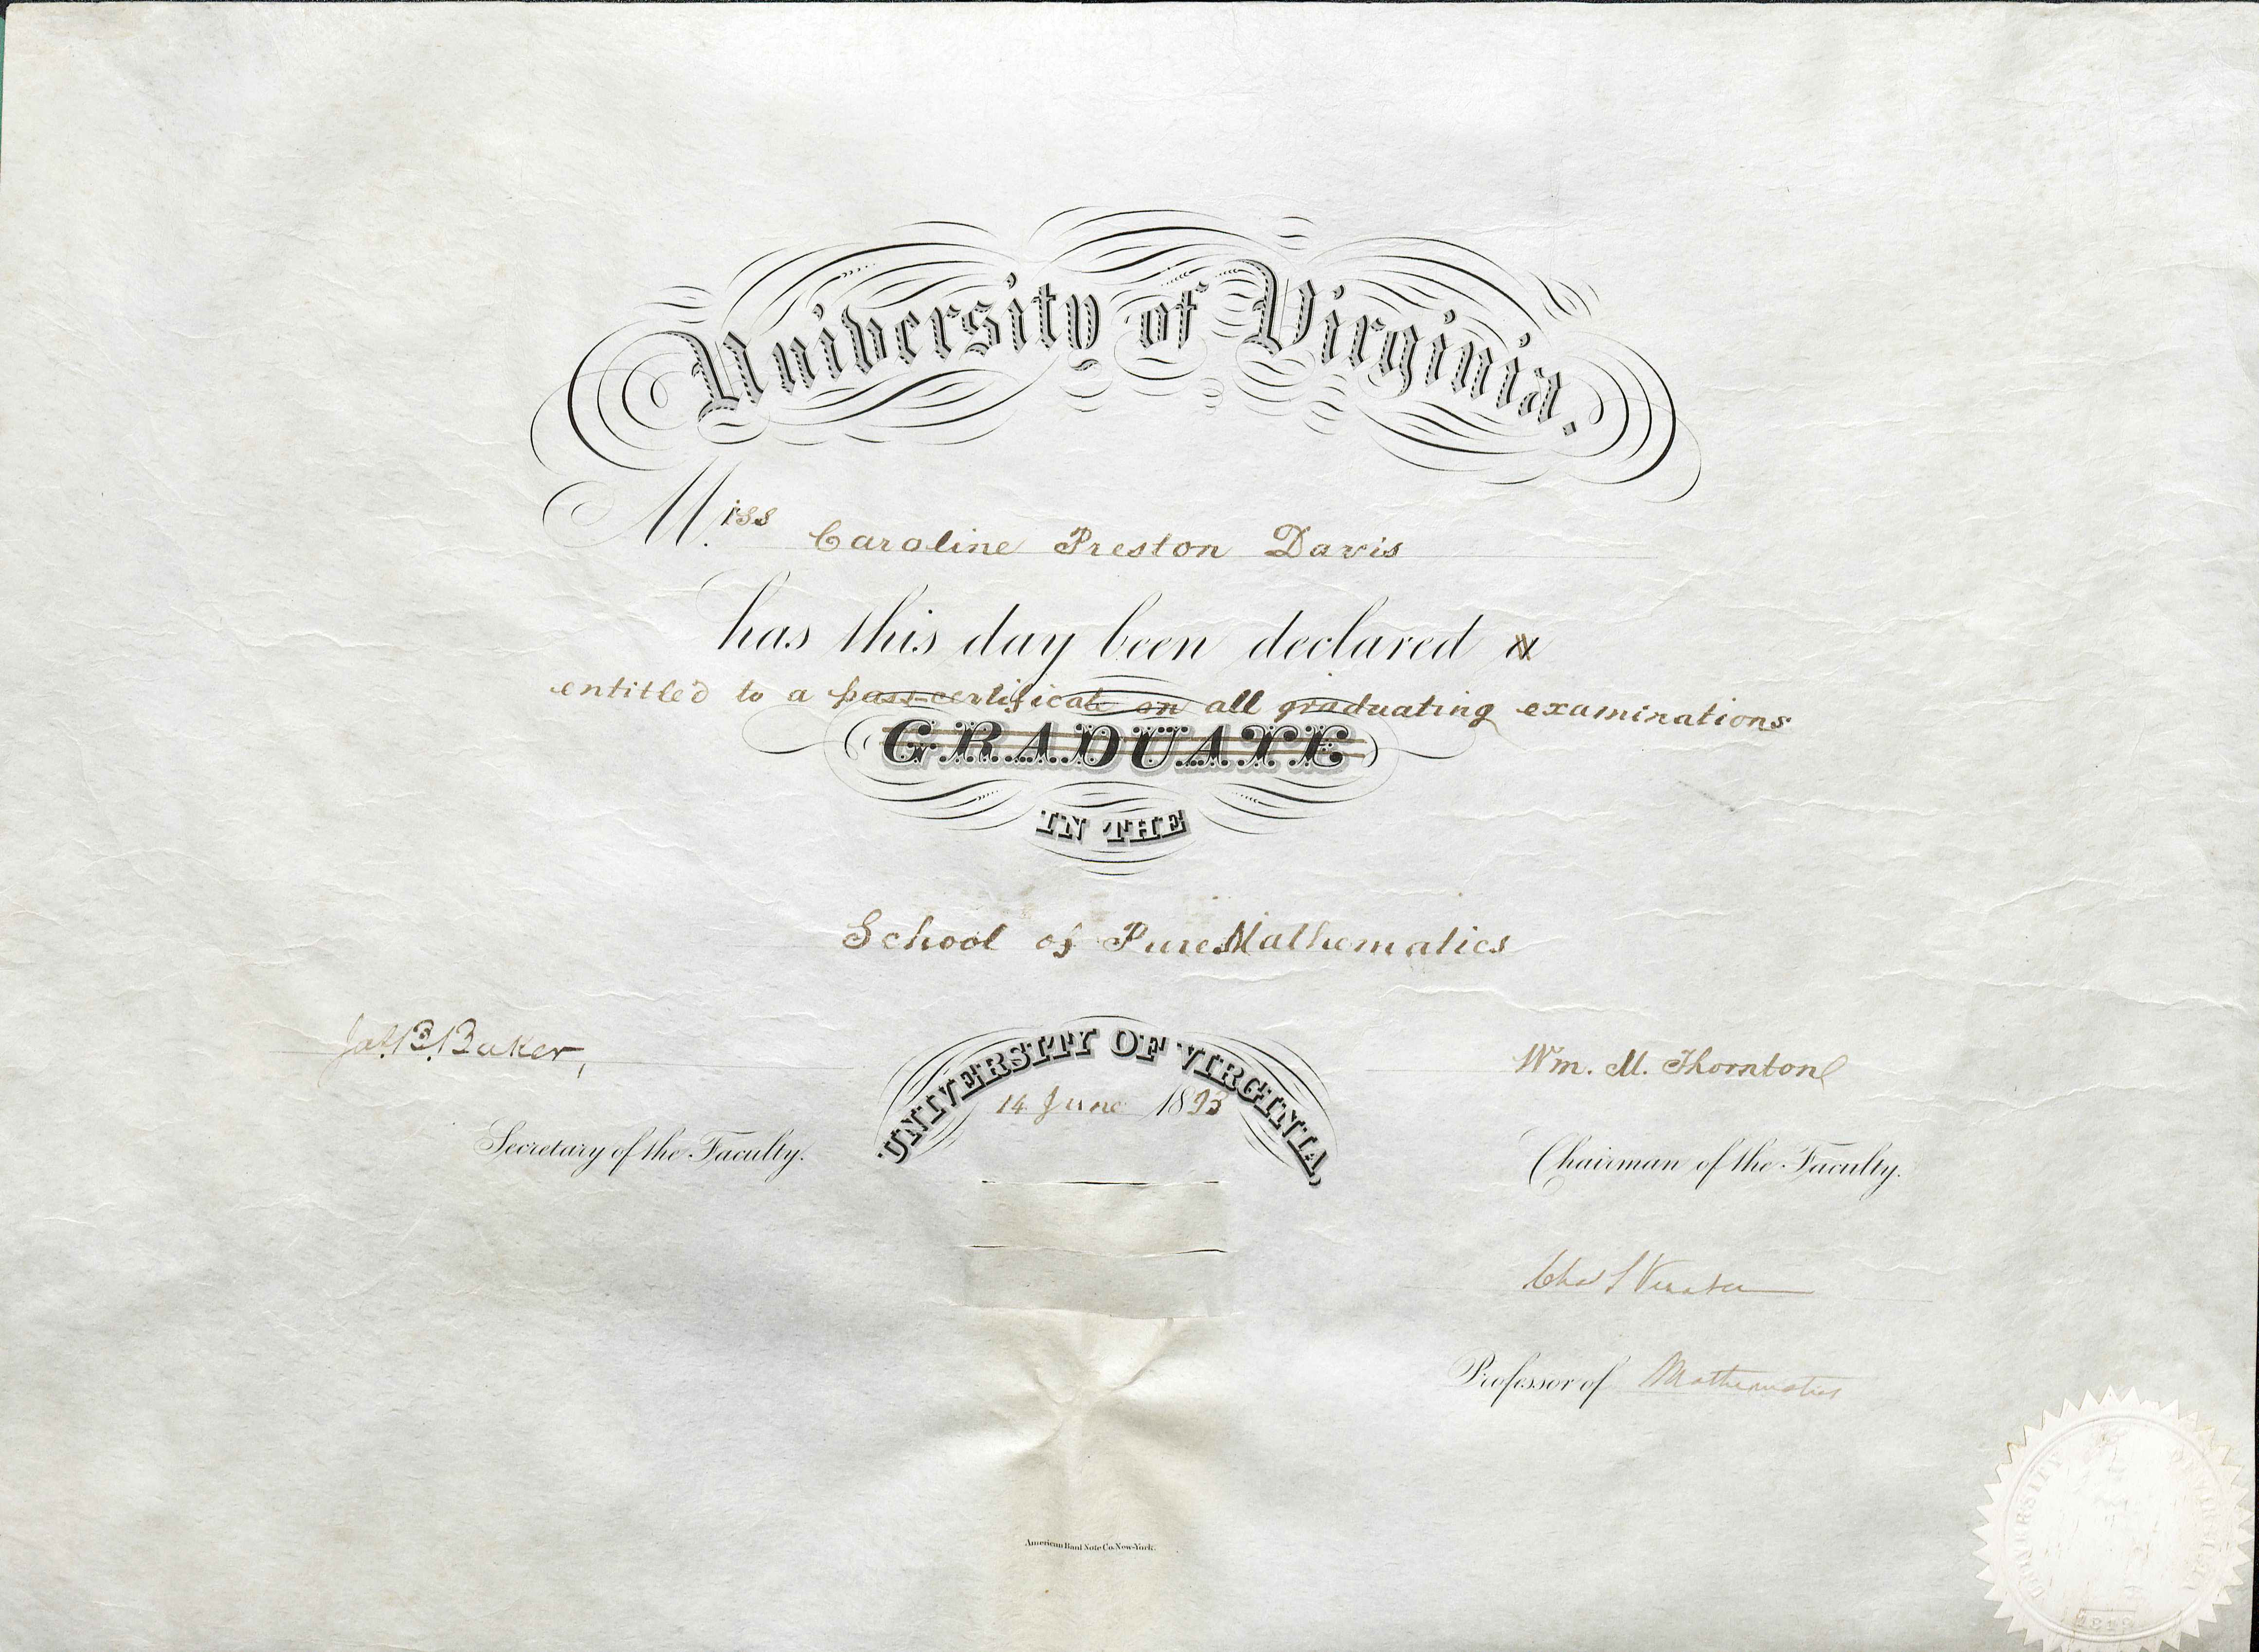 Pass Certificate of Caroline Preston Davis. June 14, 1893. After the Board of Visitors passed the resolution about women studying at U.Va., in 1892, Caroline Preston Davis became the first female student and the first woman to have her studies recognized at U.Va. By taking the same mathematics examinations as men (and doing quite well on them), she earned this pass certificate in lieu of diploma. The paper on which this certificate was printed was the same as diploma paper, but parts of the diploma were marked out. Note that “Mr.” was changed into “Miss” and “a graduate” became “entitled to a pass-certificate on all graduating examinations in the School of Pure Mathematics.” This certificate shows how women were simultaneously close to and far from the educational opportunities that men had. (MSS 4951. Image by Petrina Jackson)